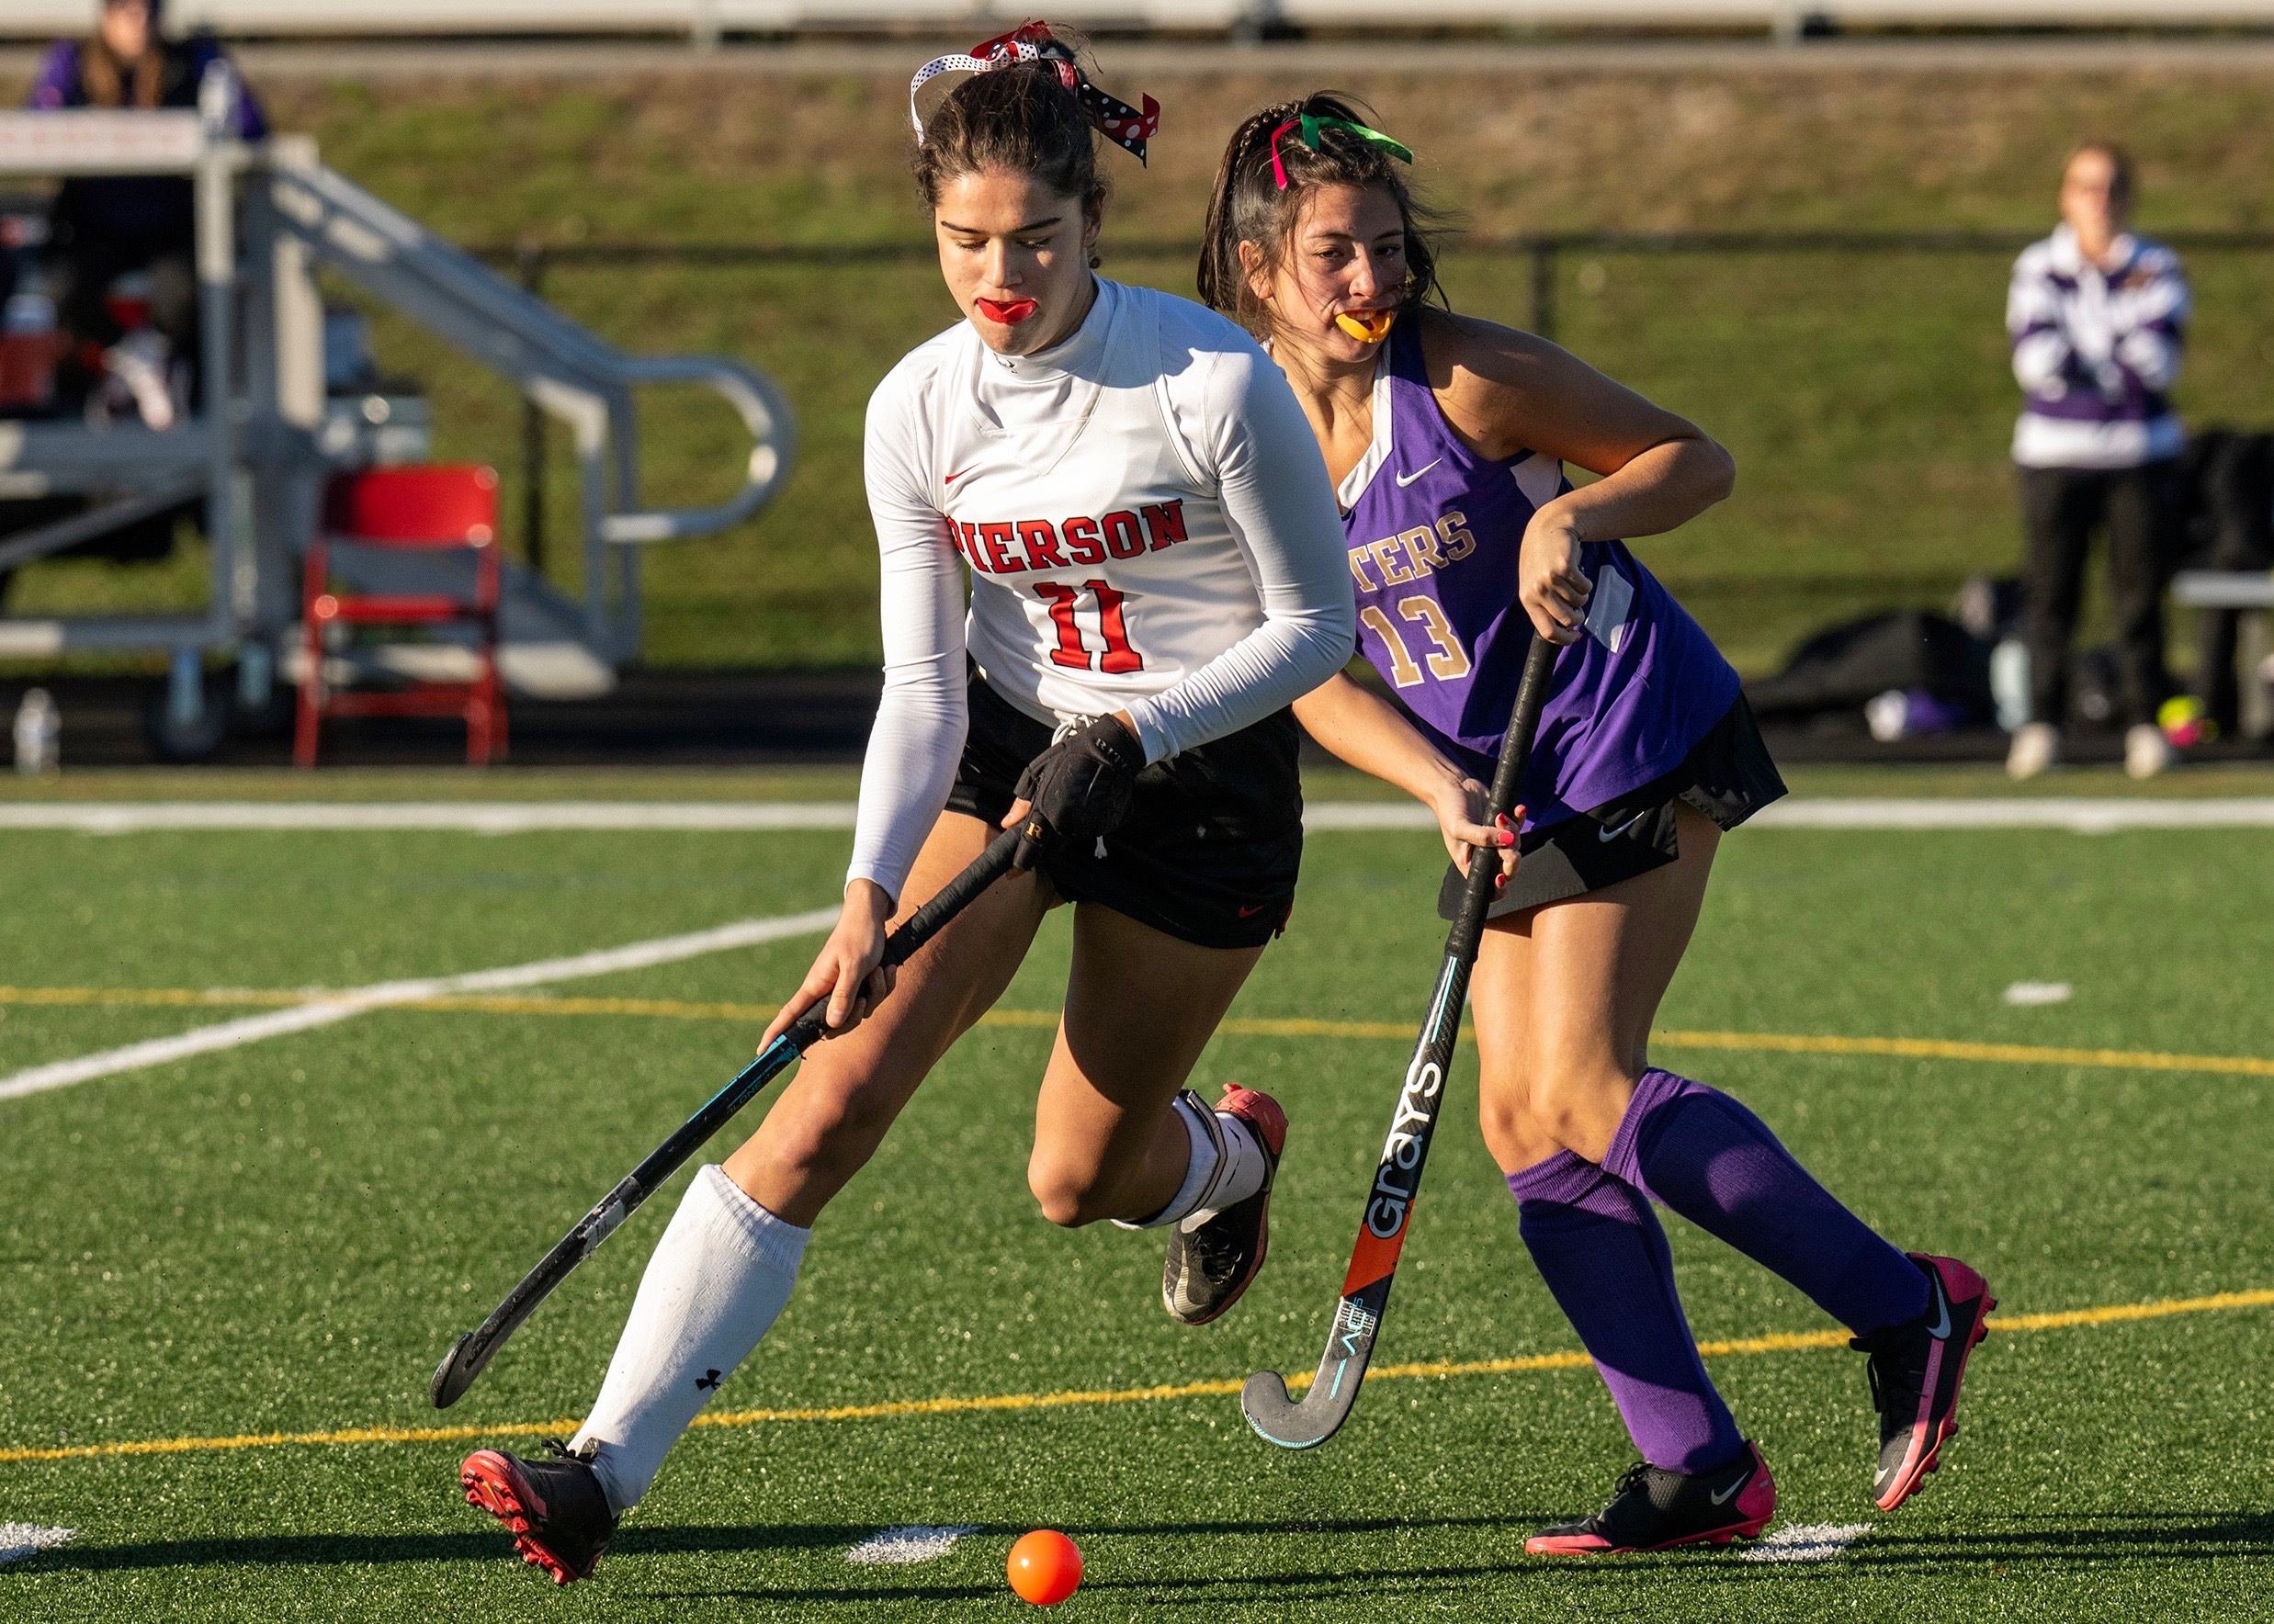 Meridith Spolarich carries the ball into Greenport/Southold's zone. MARIANNE BARNETT